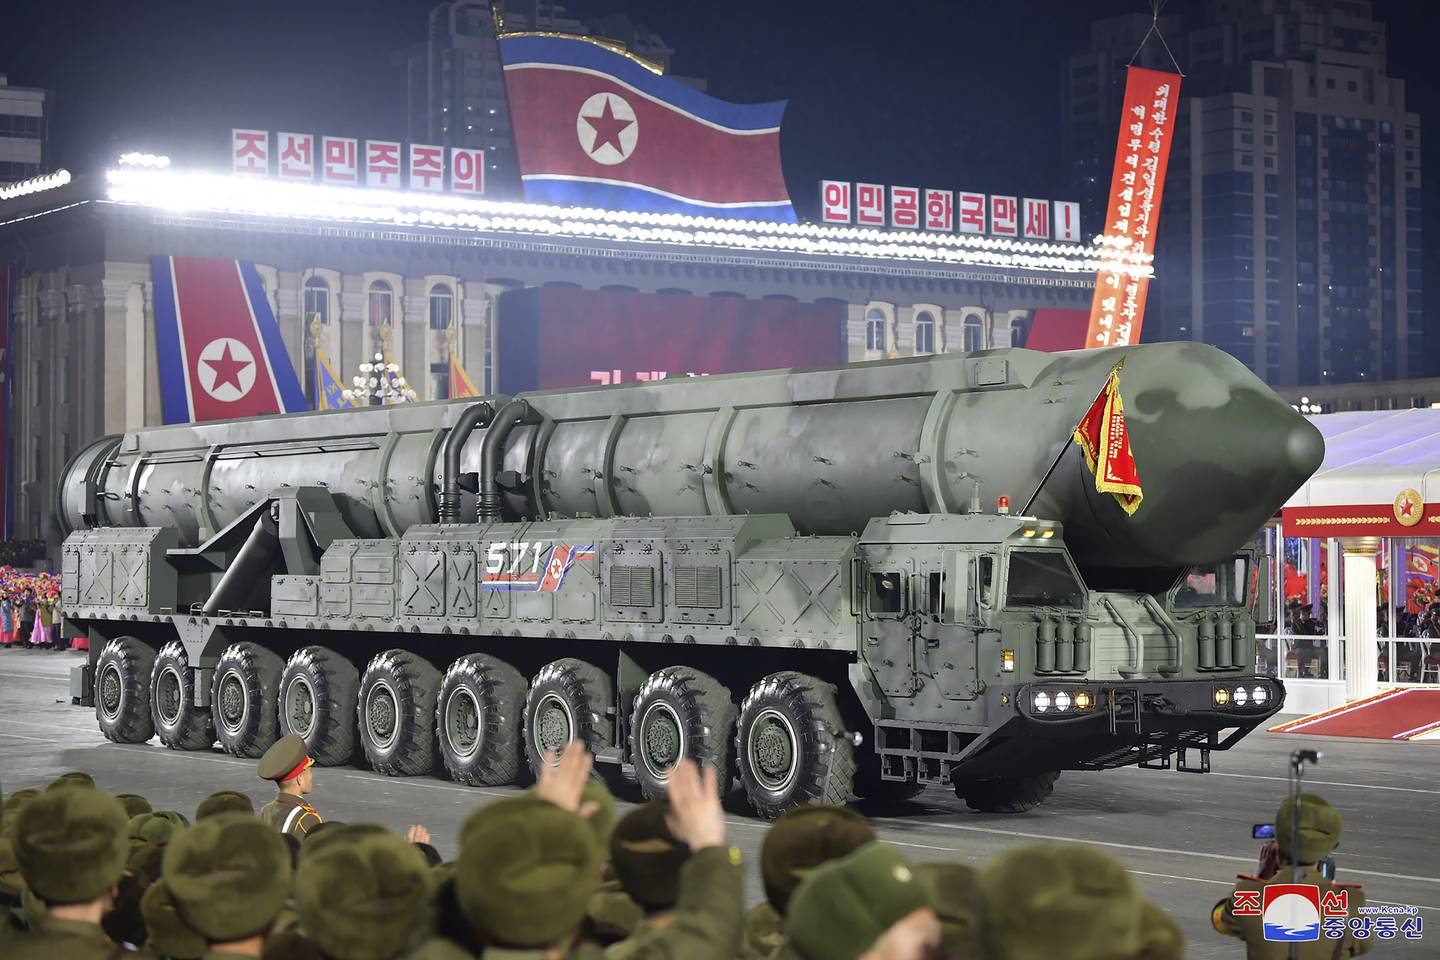 This photo provided by the North Korean government, shows what it says an intercontinental ballistic missile during a military parade to mark the 75th founding anniversary of the Korean People's Army on Kim Il Sung Square in Pyongyang, North Korea Wednesday, Feb. 8, 2023.